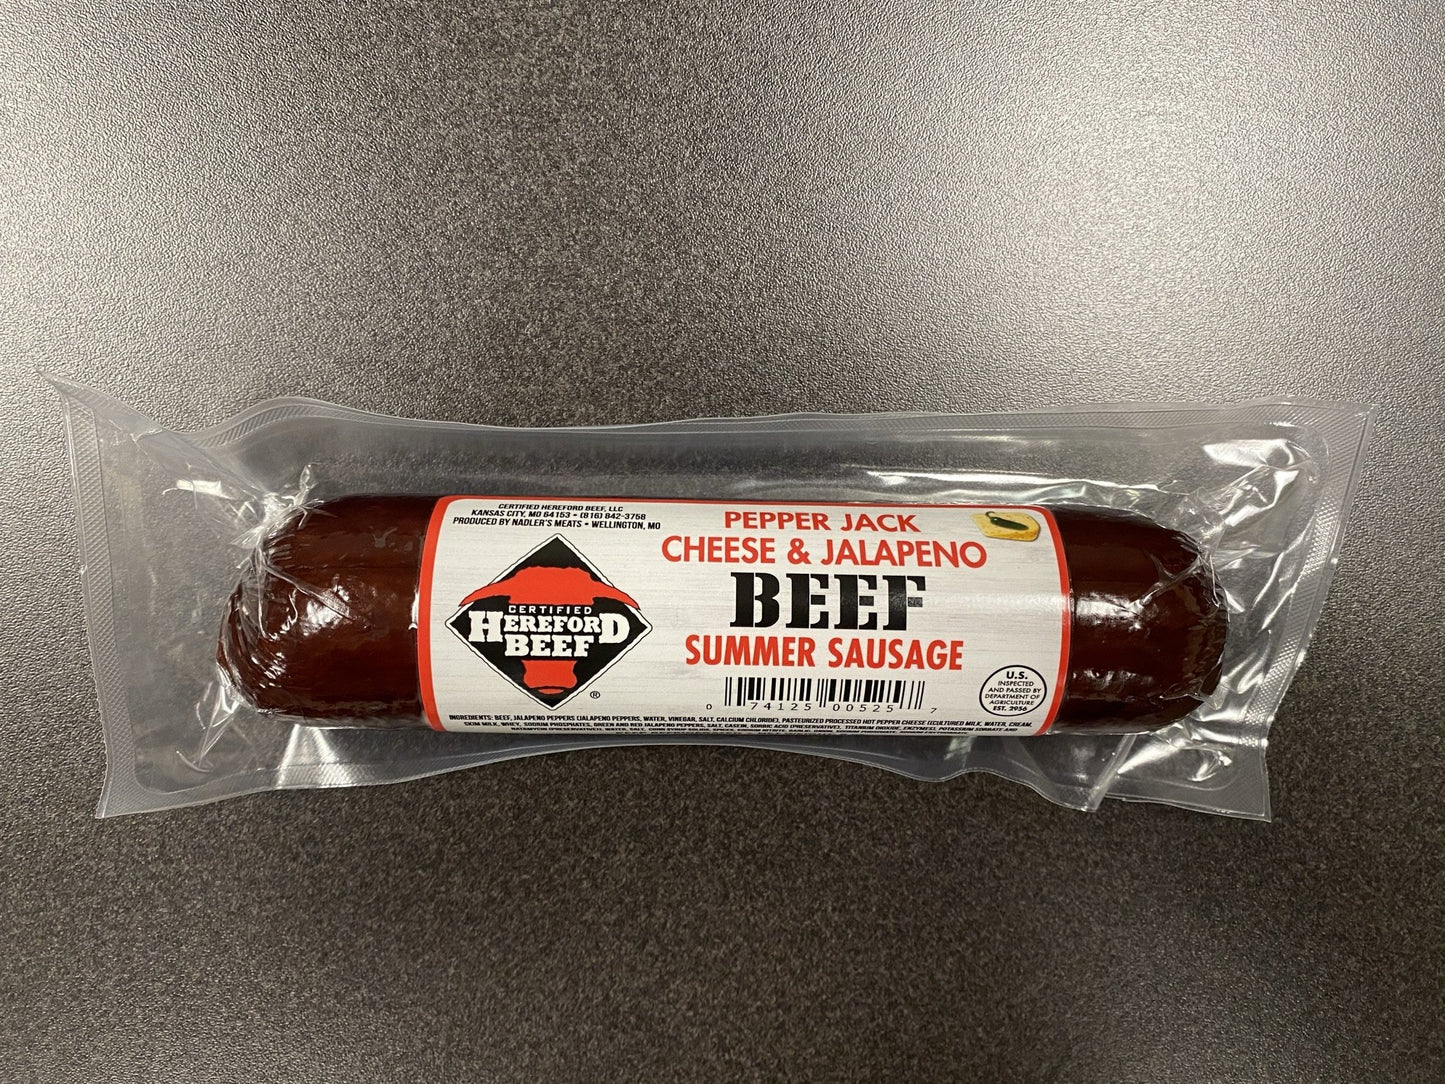 Certified Hereford Summer Sausage